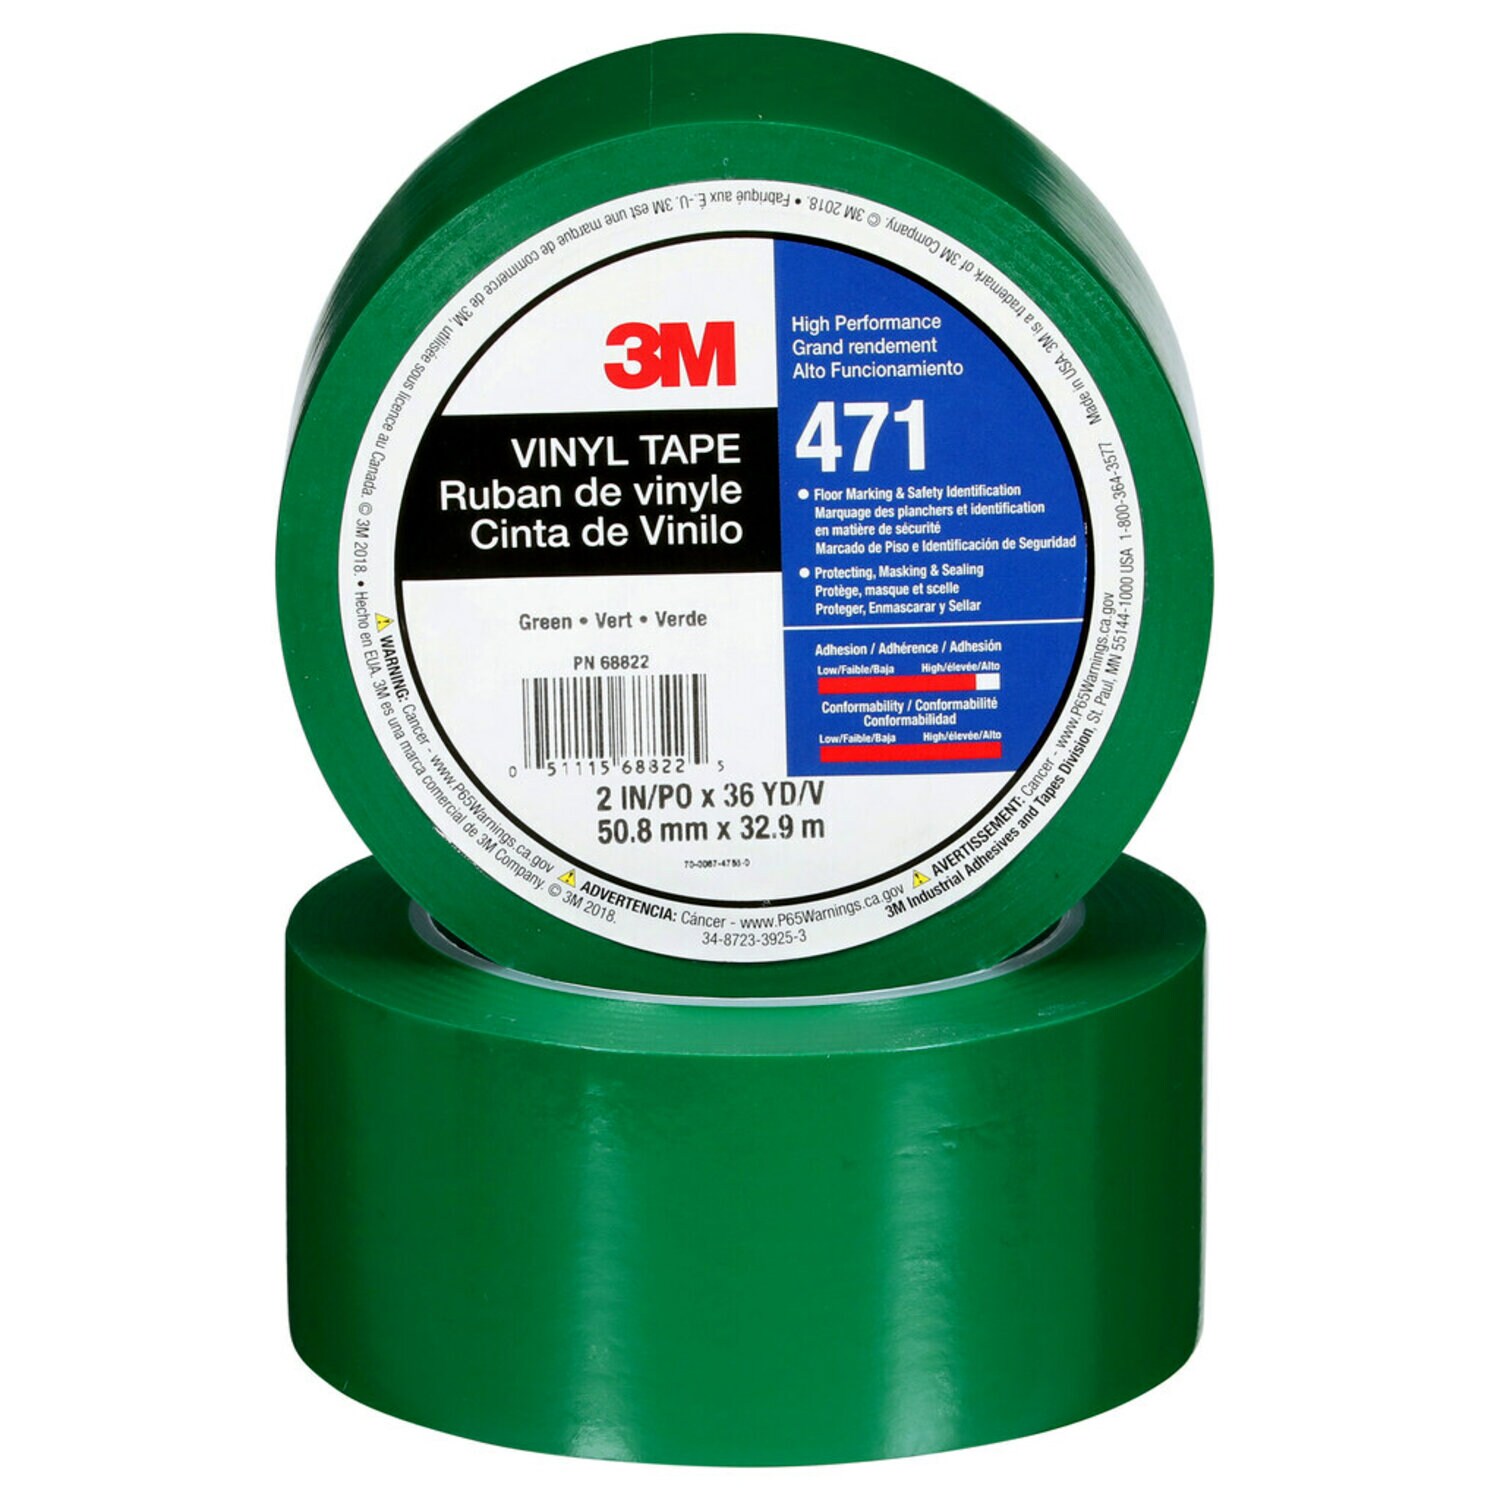 7100044652 - 3M Vinyl Tape 471, Green, 2 in x 36 yd, 5.2 mil, 24 rolls per case,
Individually Wrapped Conveniently Packaged